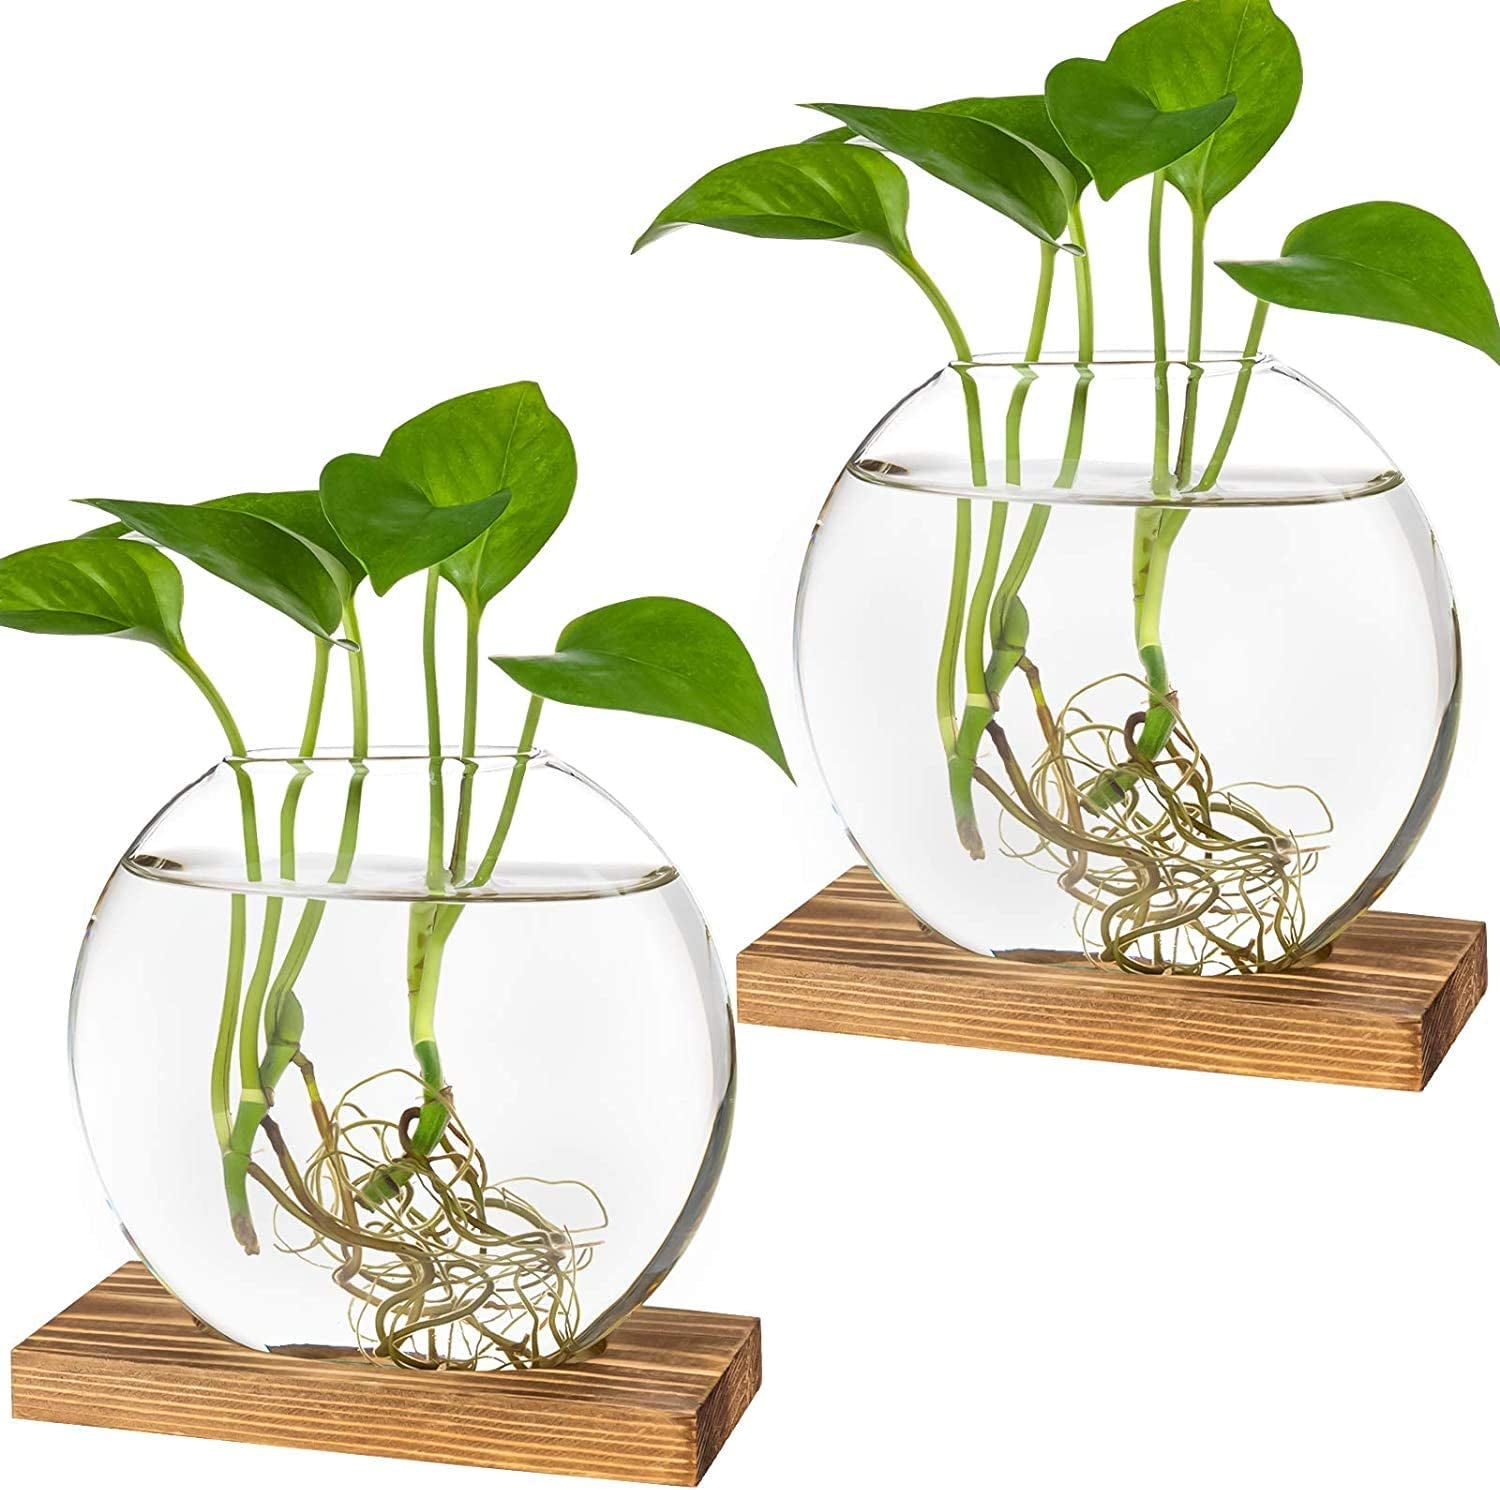 Kingbuy, Kingbuy Desktop round Glass Planter Terrarium Flower Vase with Wooden Stand for Propagation Small Hydroponic Plants Home Office Decor, 2 Pack, Brown